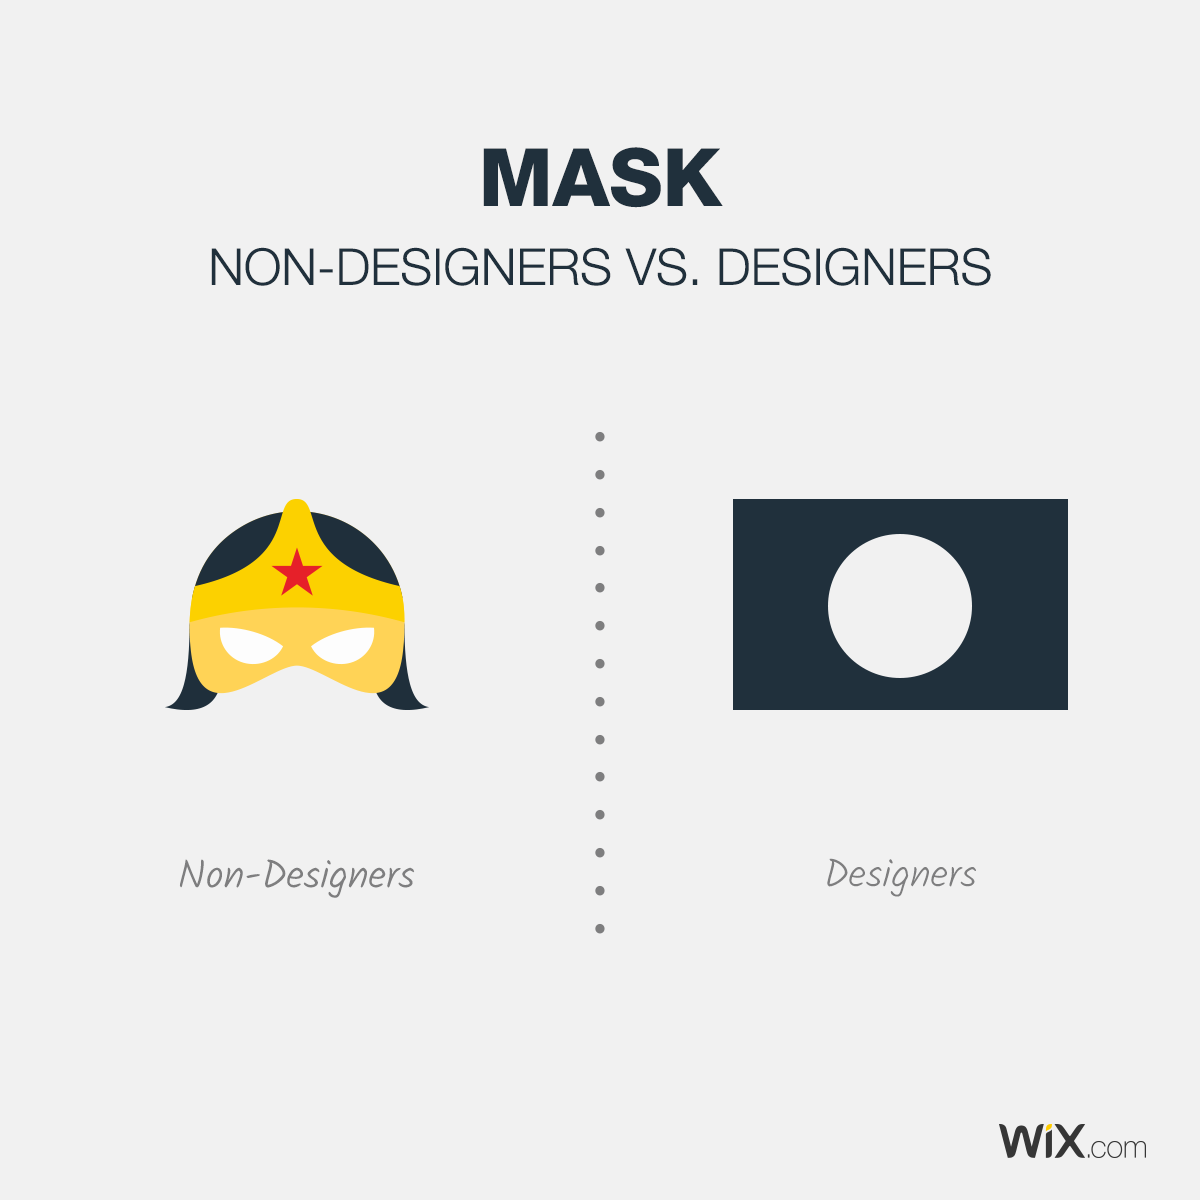 Differences Between Designers and Non-Designers - Mask